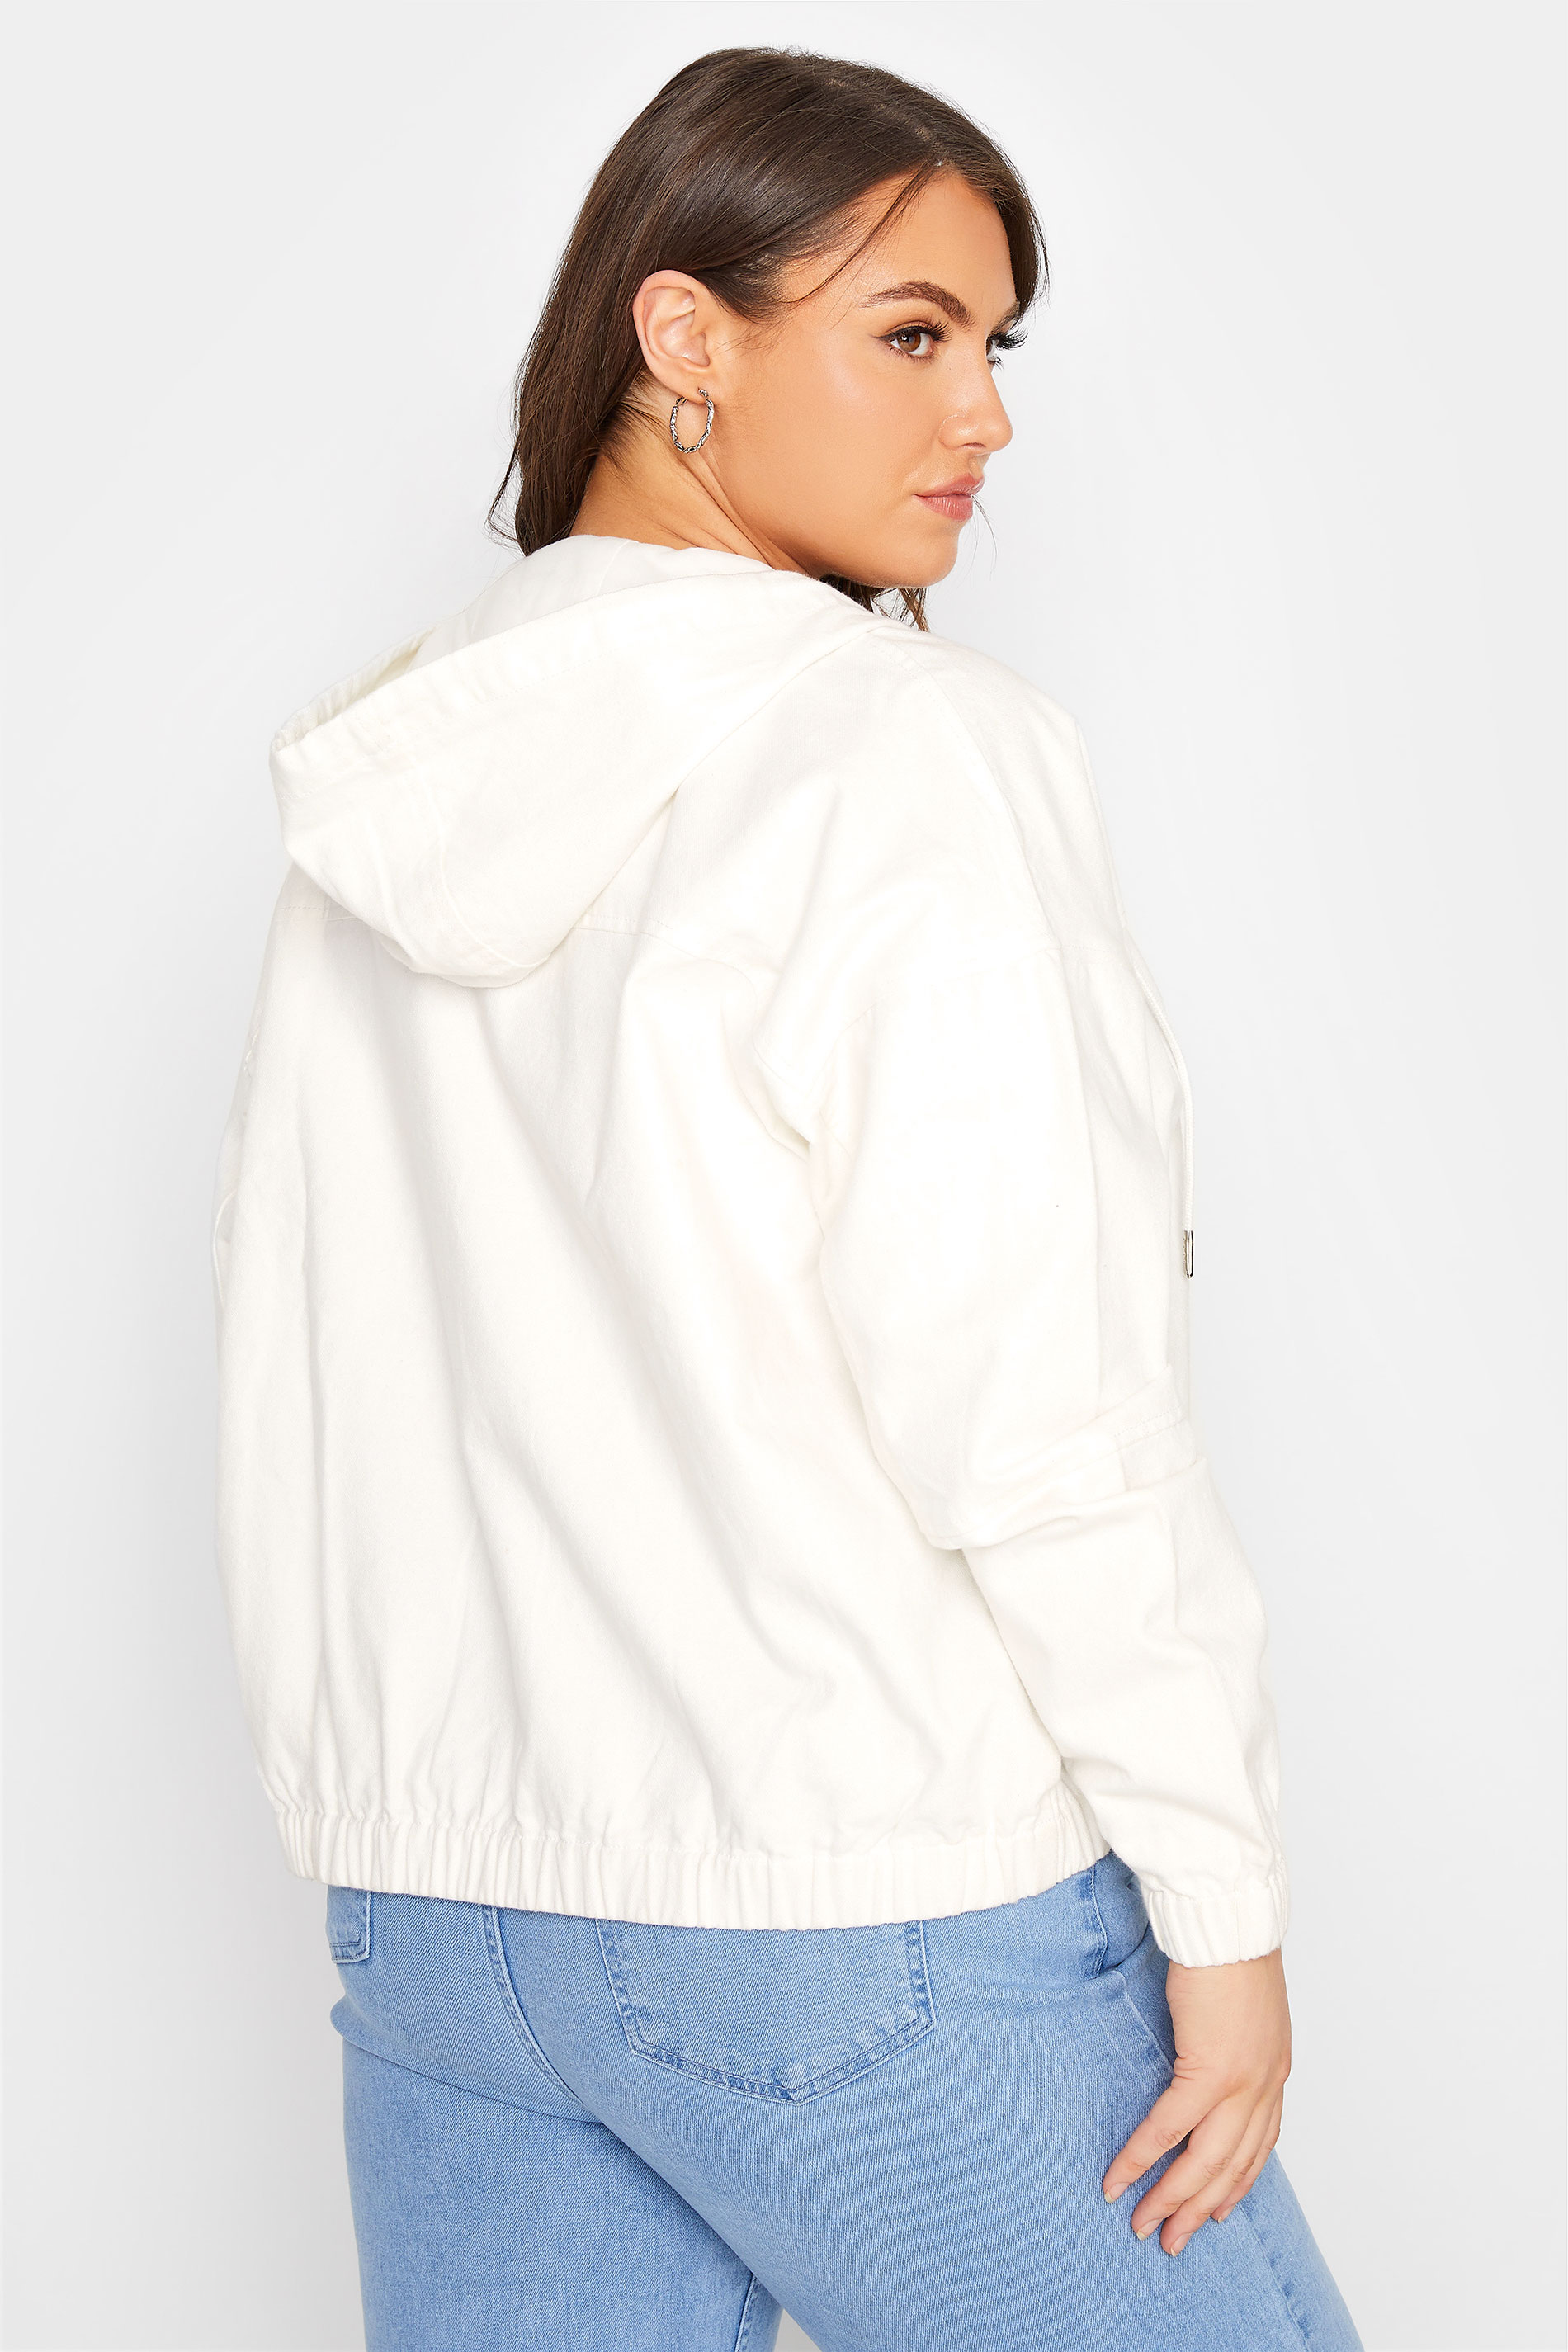 LIMITED COLLECTION Plus Size White Twill Bomber Jacket | Yours Clothing  3